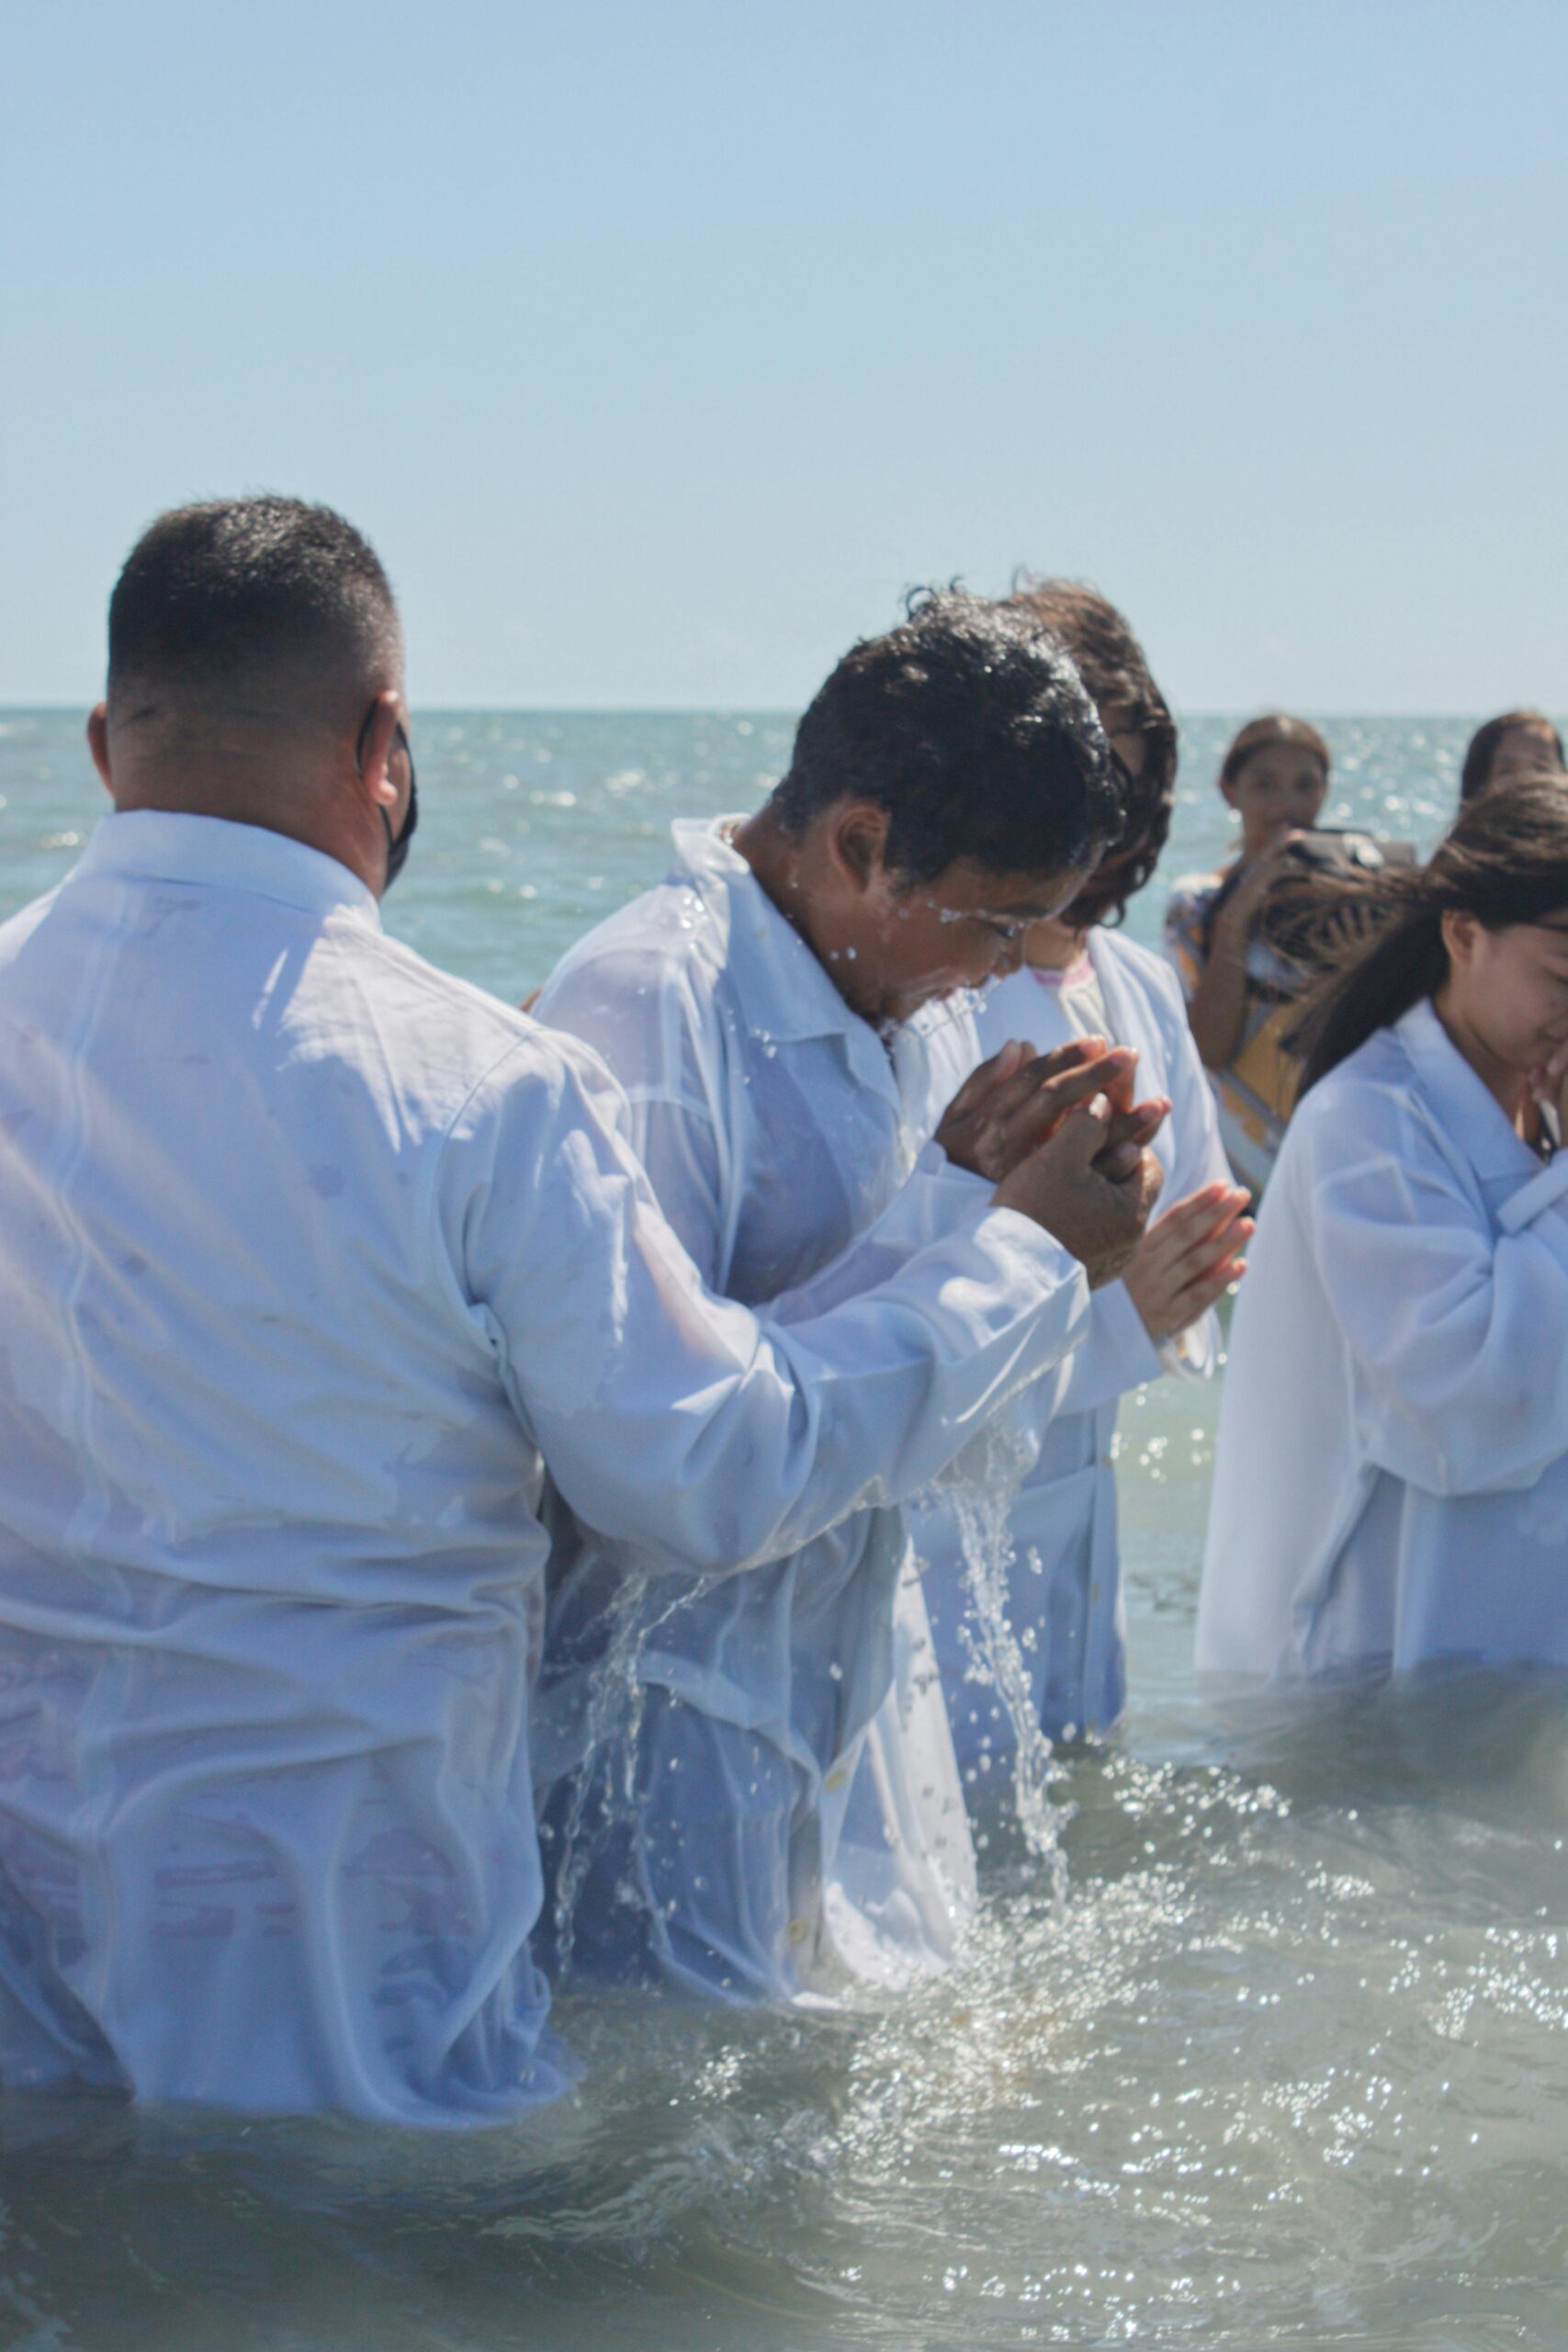 People Wearing White Shirts Getting Baptized in a Sea